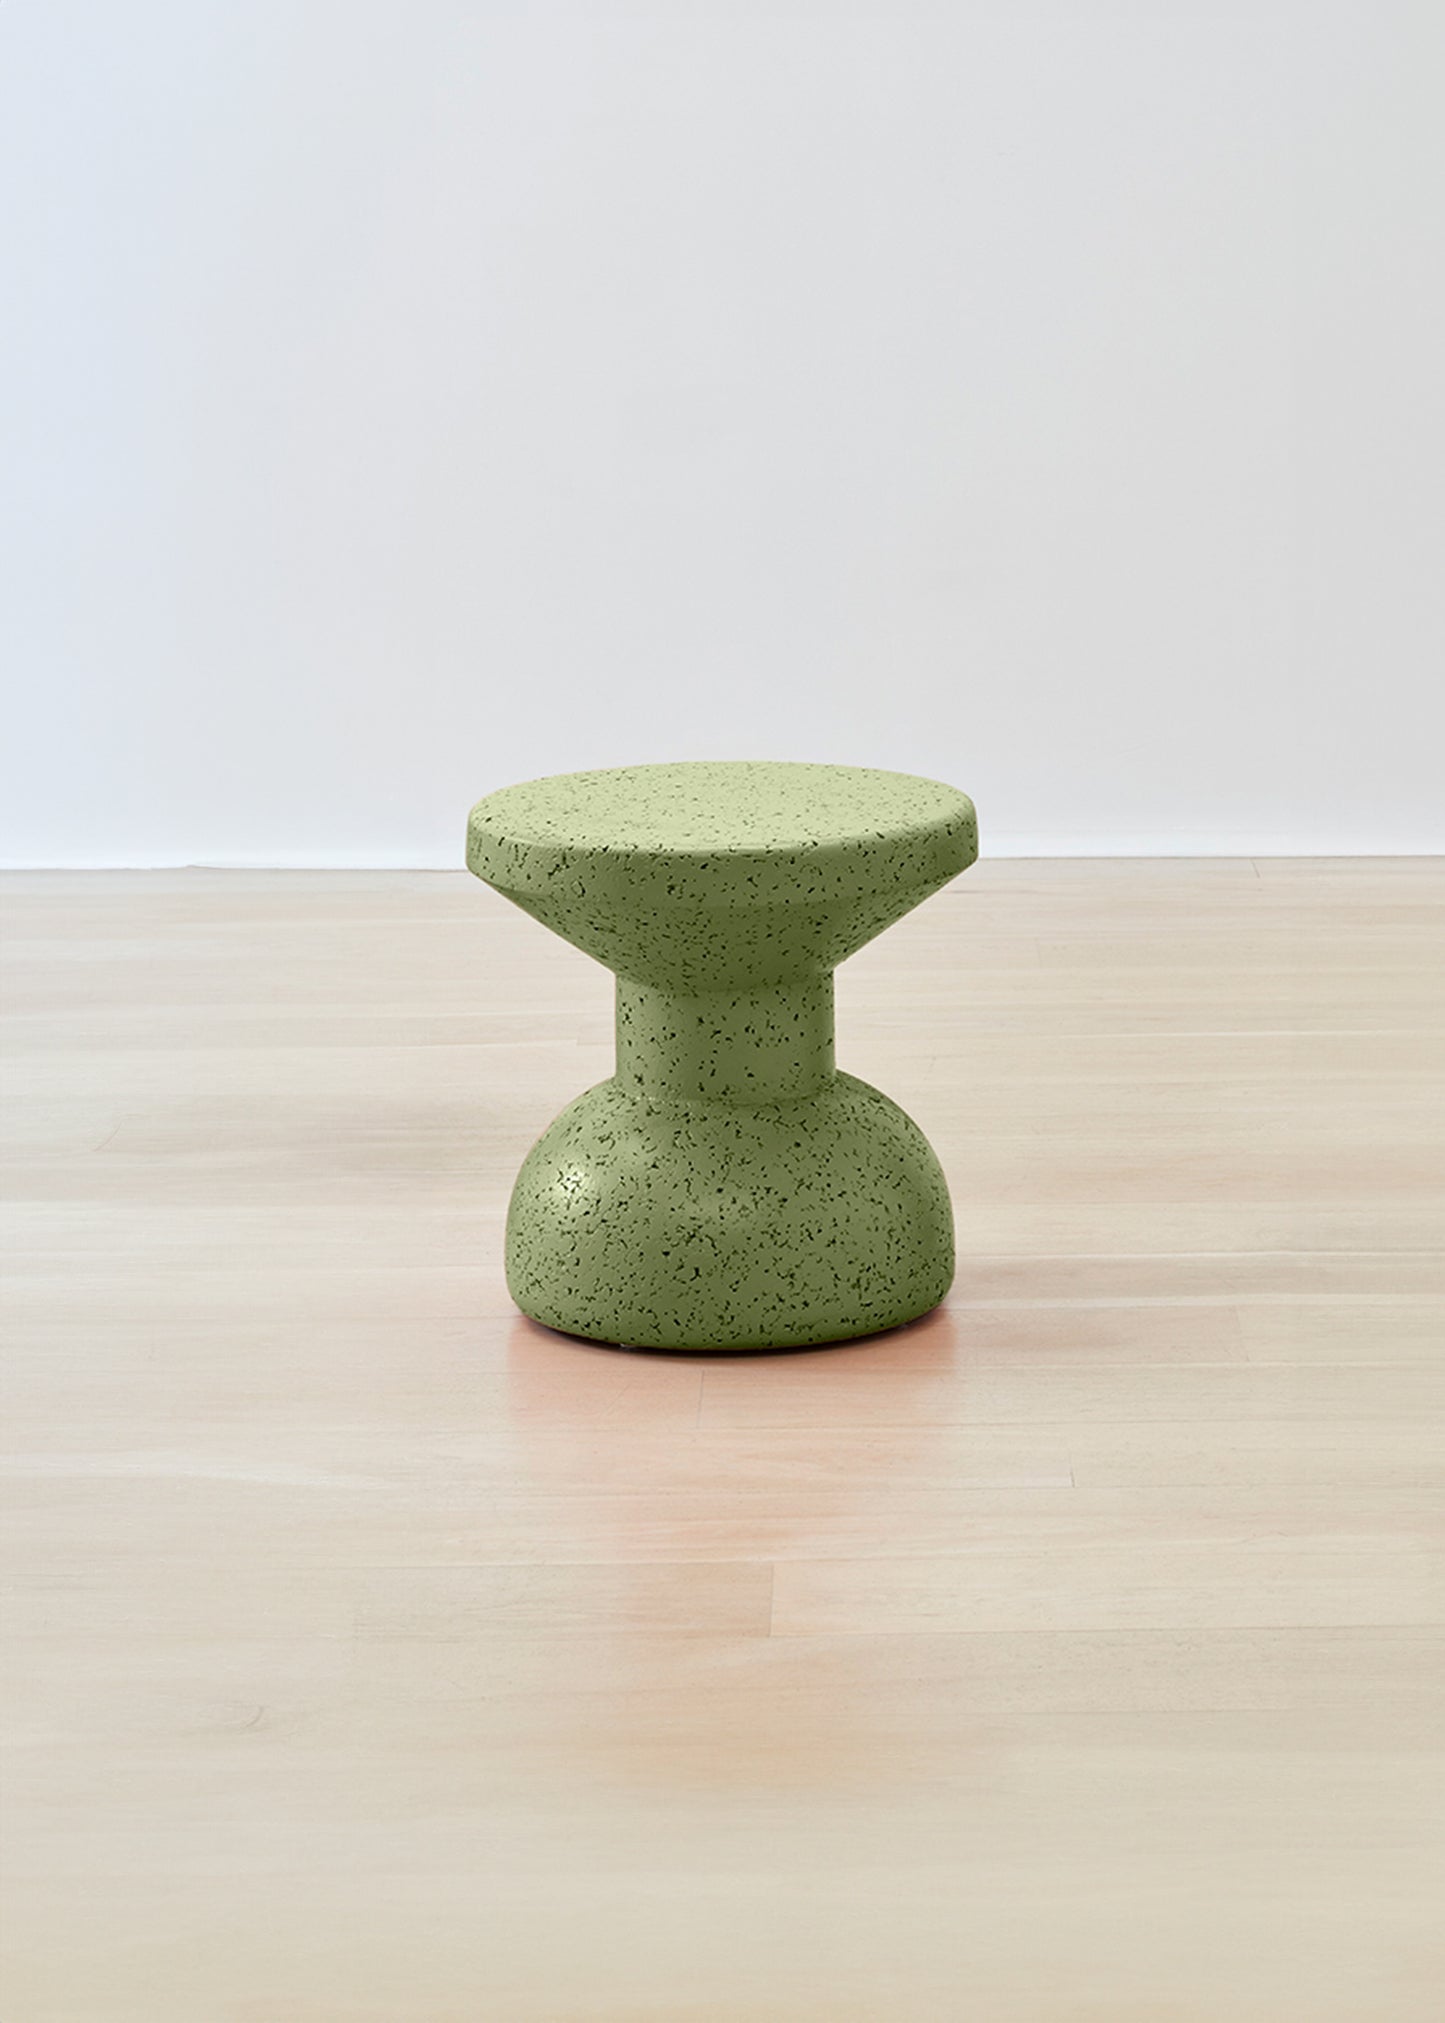 Vibrant Kanju Wiid Painted African Slim Cork Stool in a refreshing green shade, marrying eco-friendly materials with sleek design. This stool's slender silhouette and lively color make it a perfect addition to any space seeking a pop of natural vibrancy coupled with modern, sustainable craftsmanship